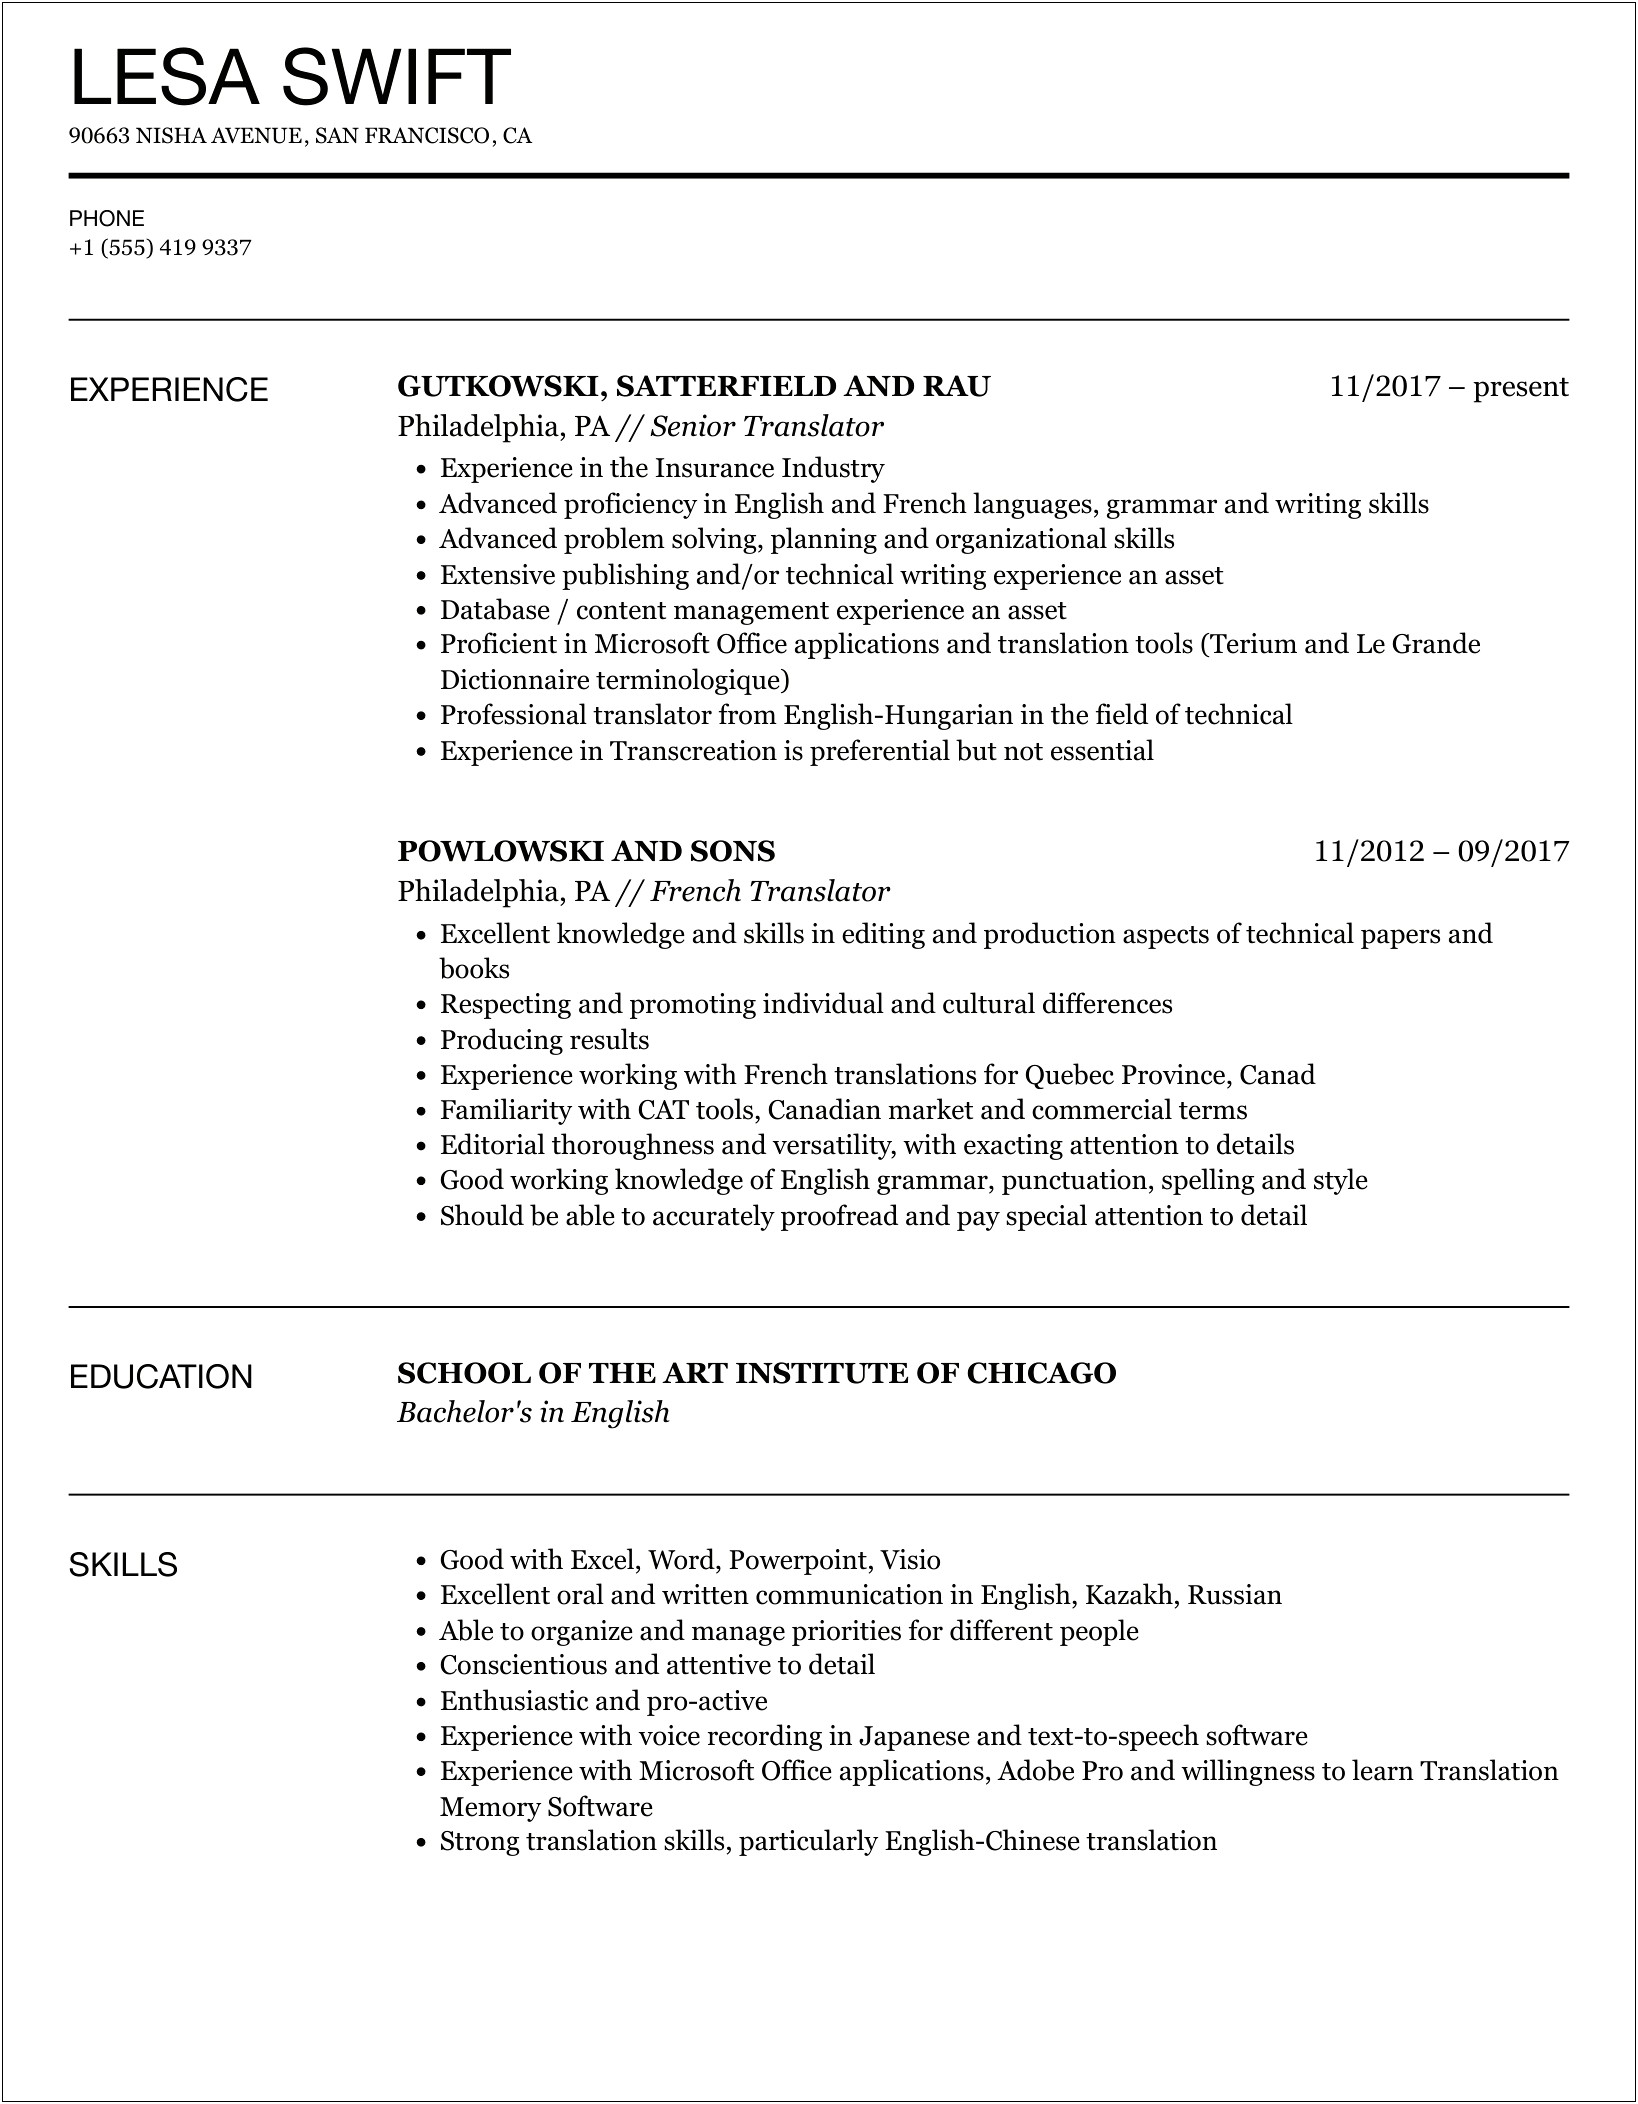 Translate Musical Experience And Skills To Job Resume